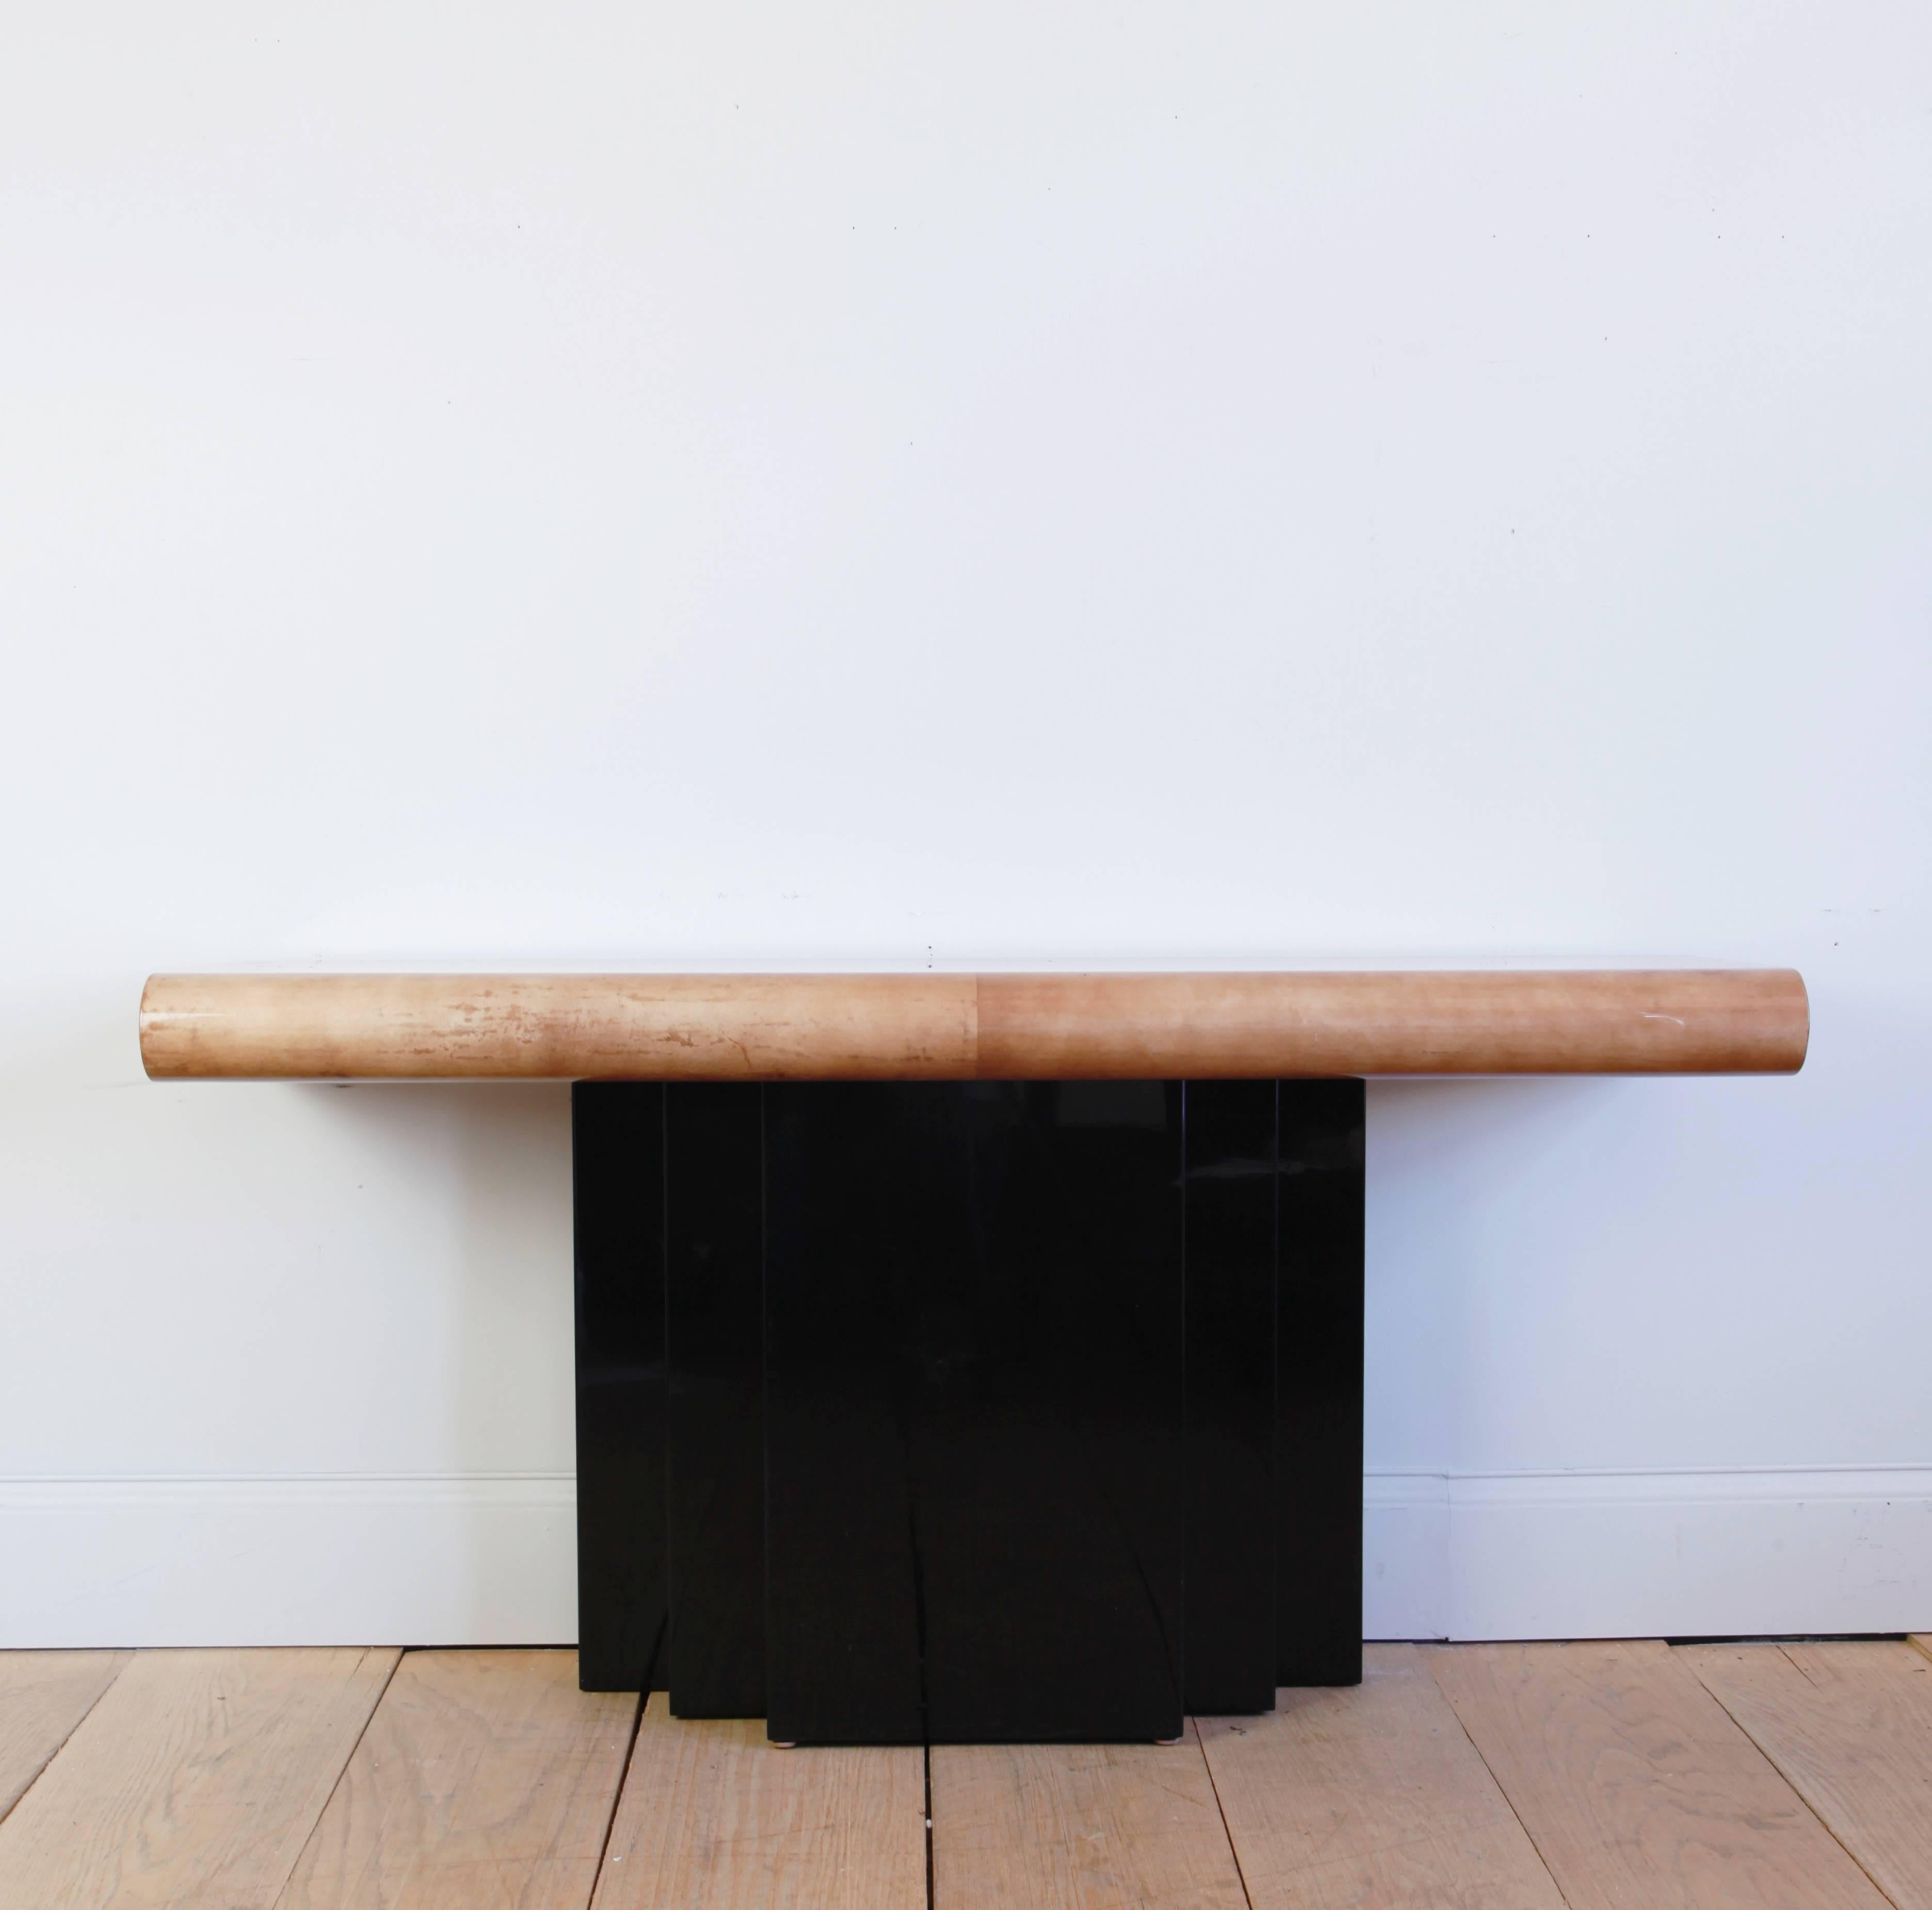 The label on this console table indicates it was a unique piece, custom-made. Goatskin covered rectangular top with a curved edge, on a stepped, black lacquered base.